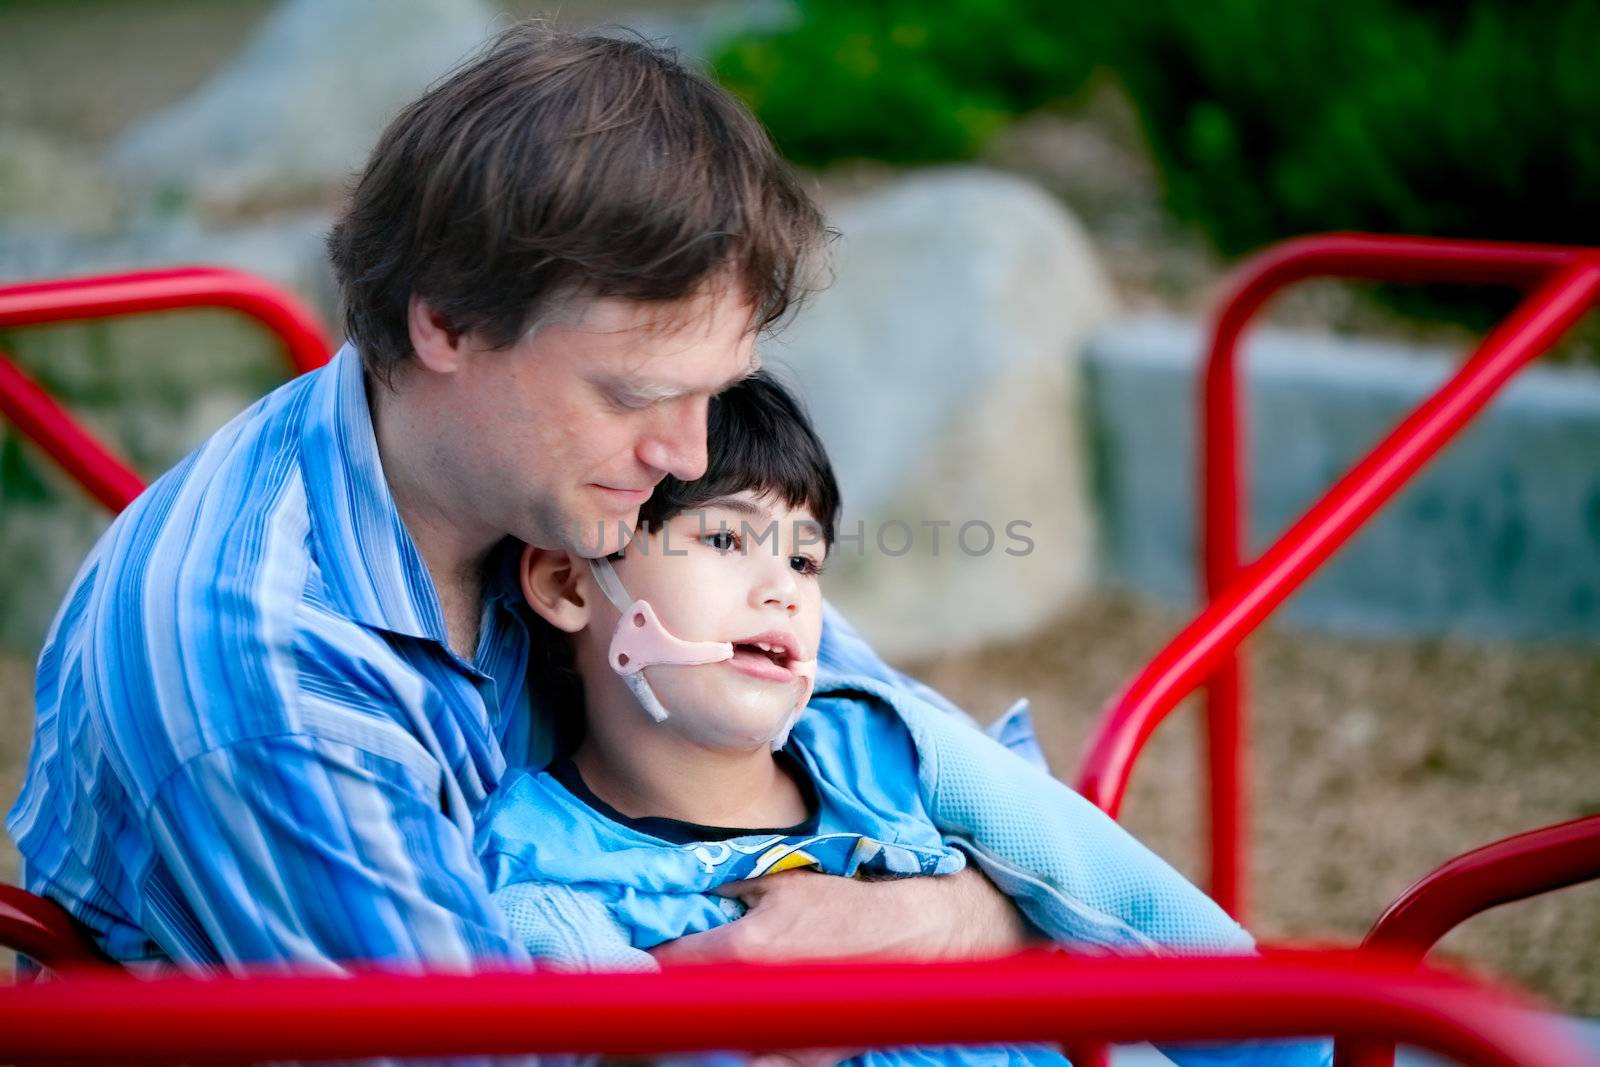 Father playing with disabled son on merry go round at playground. Child has cerebral palsy. 